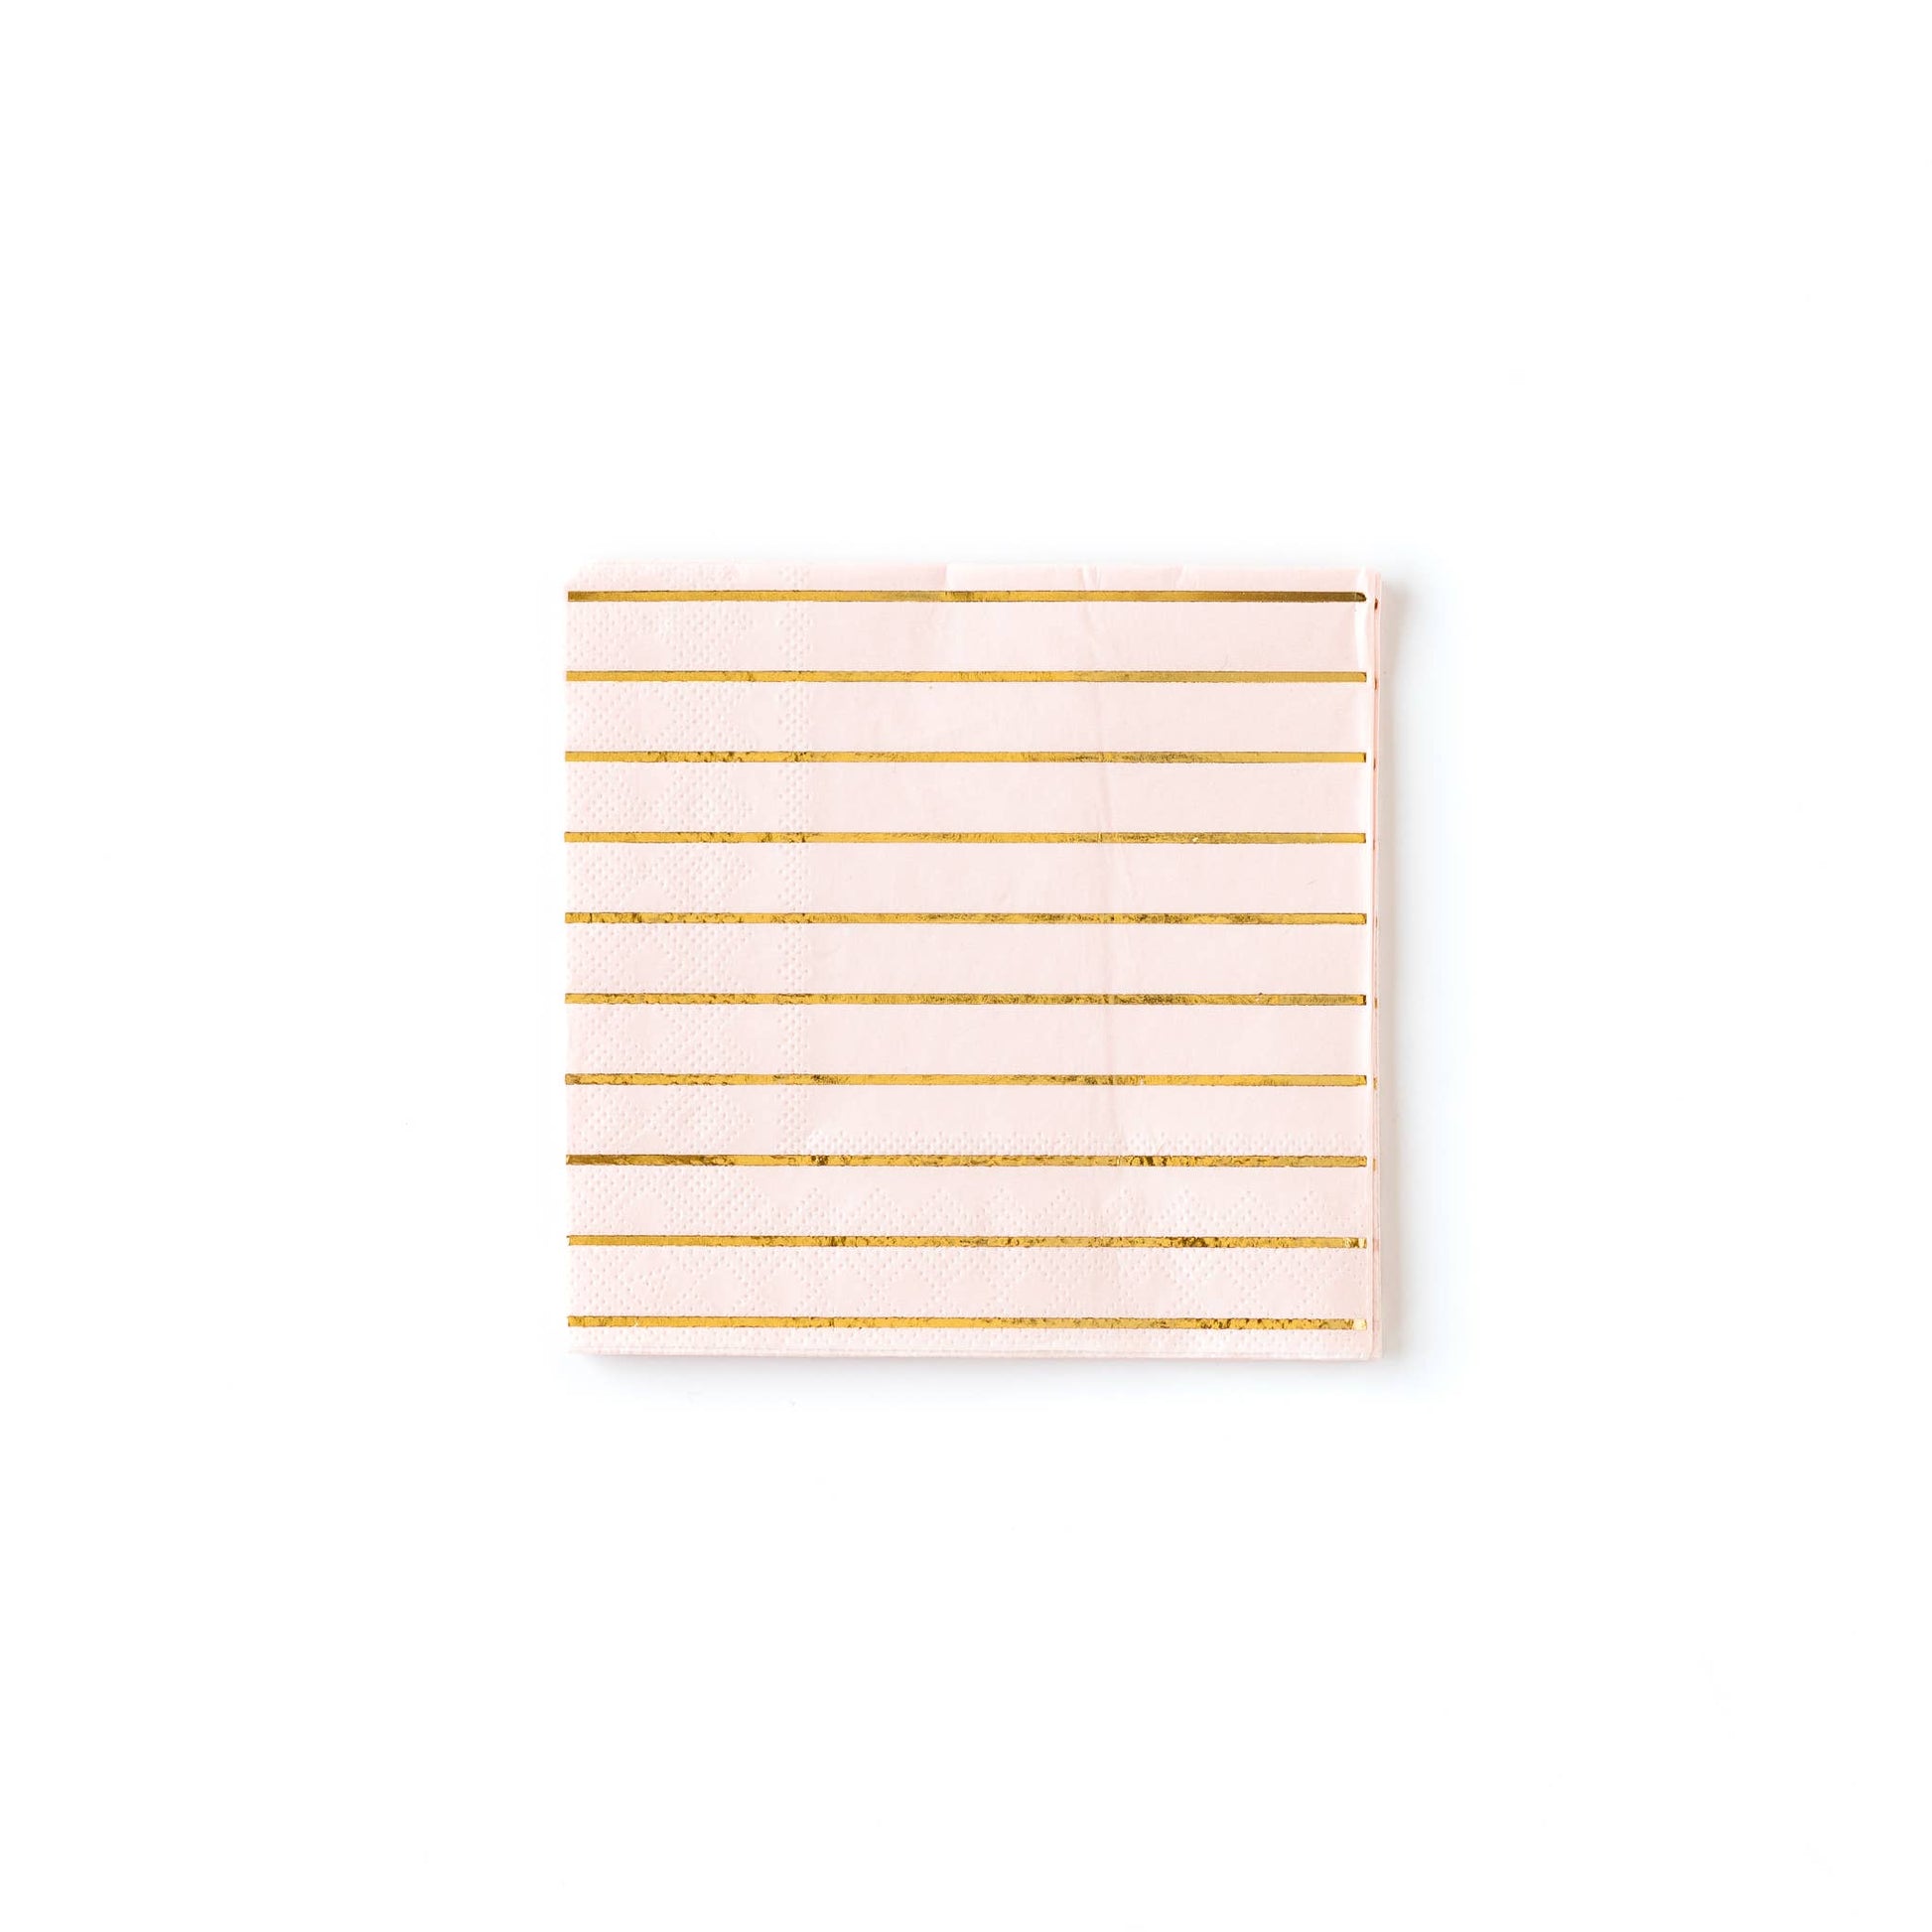 Planning a sophisticated bridal shower, Easter brunch or valentine party? These 5" blush napkins with gold foil stripes are a pretty accessory for your finger foods and desserts no matter what the occasion is! princess party, Galentines party, bachelorette party, baby shower, baby girl shower, engagement party, blush napkins, blush and gold foil napkins, easter party, ballerina party